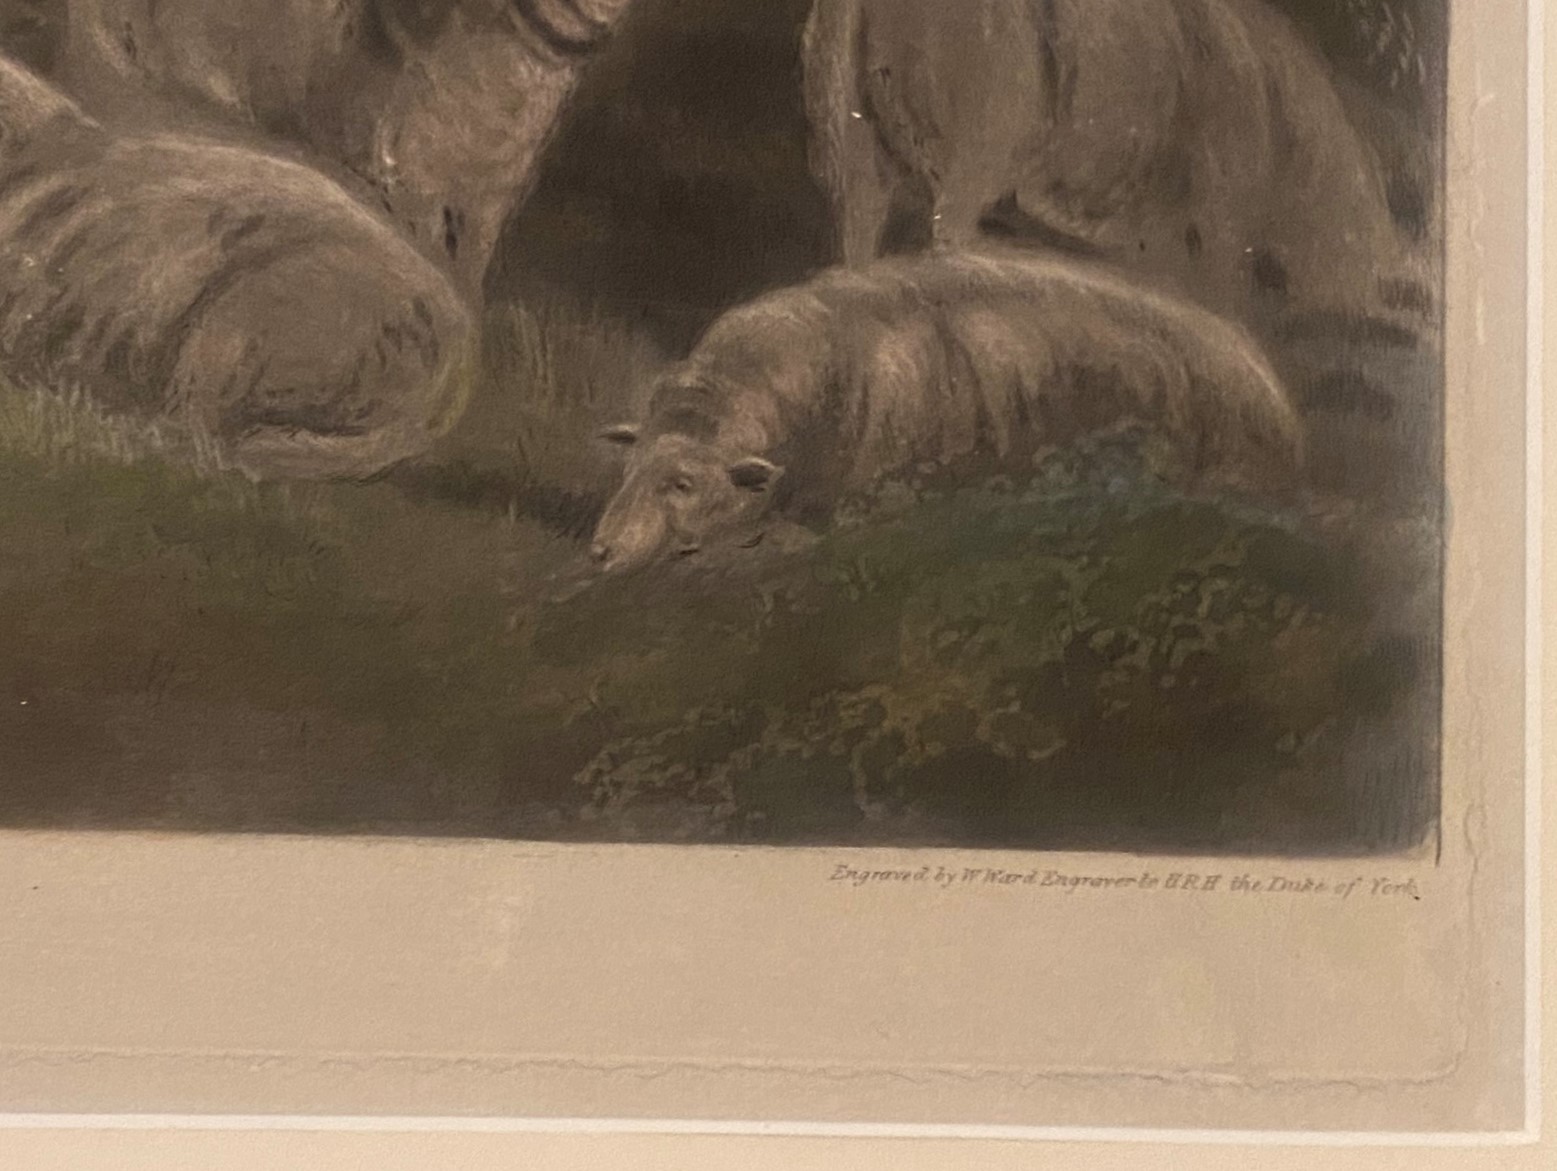 Pair of Engravings after George Moreland “The shepherds” and “The warrener” both Engraved by W York - Image 7 of 8